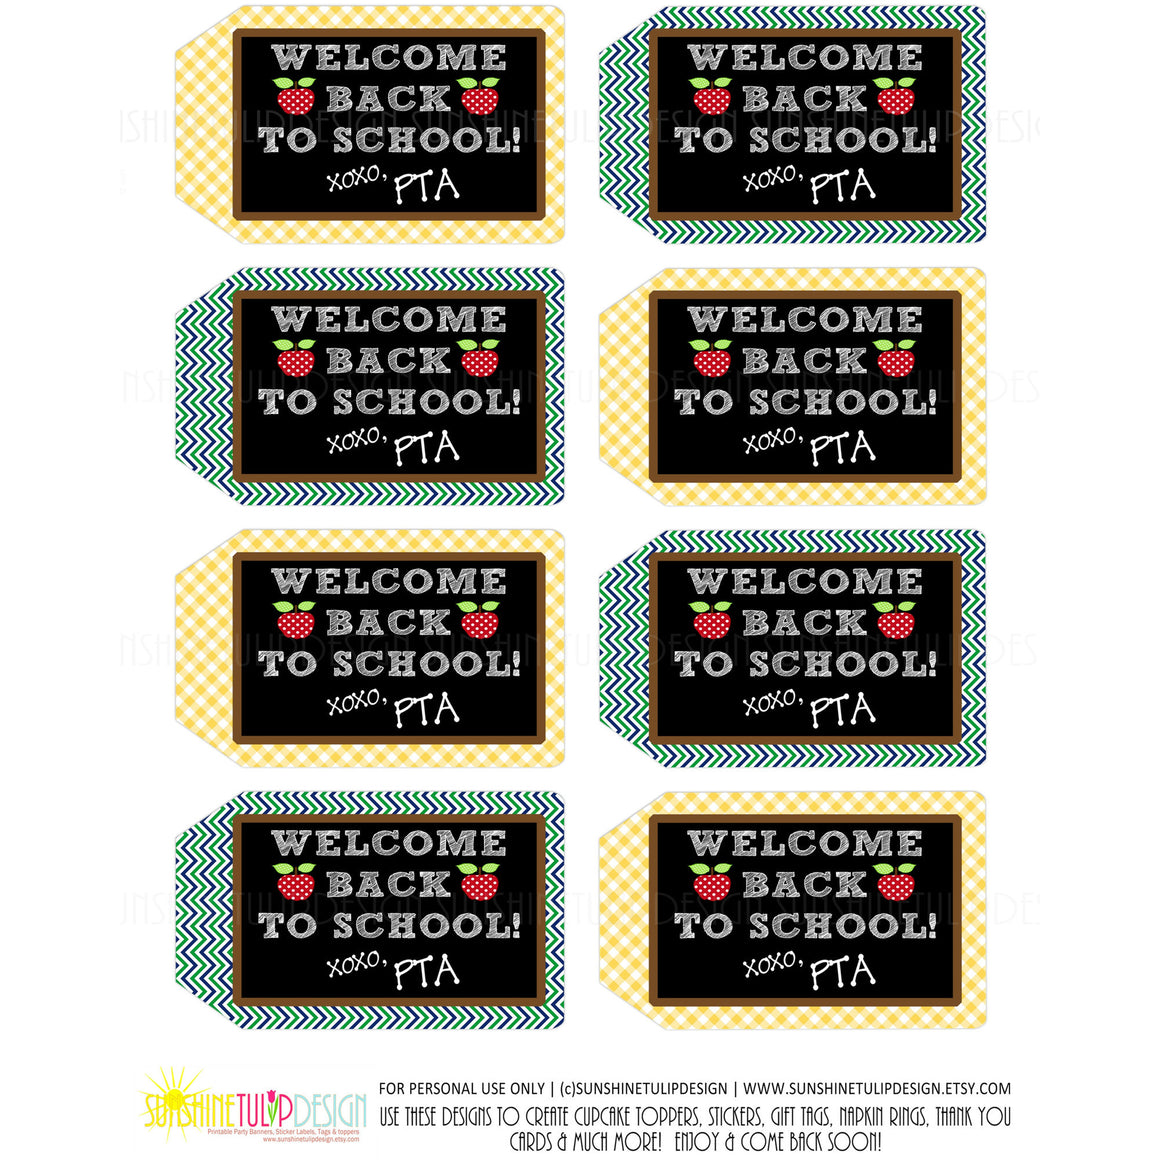 Printable PTA Tags, Welcome Back to School Teacher Appreciation Tags by SUNSHINETULIPDESIGN - Sunshinetulipdesign